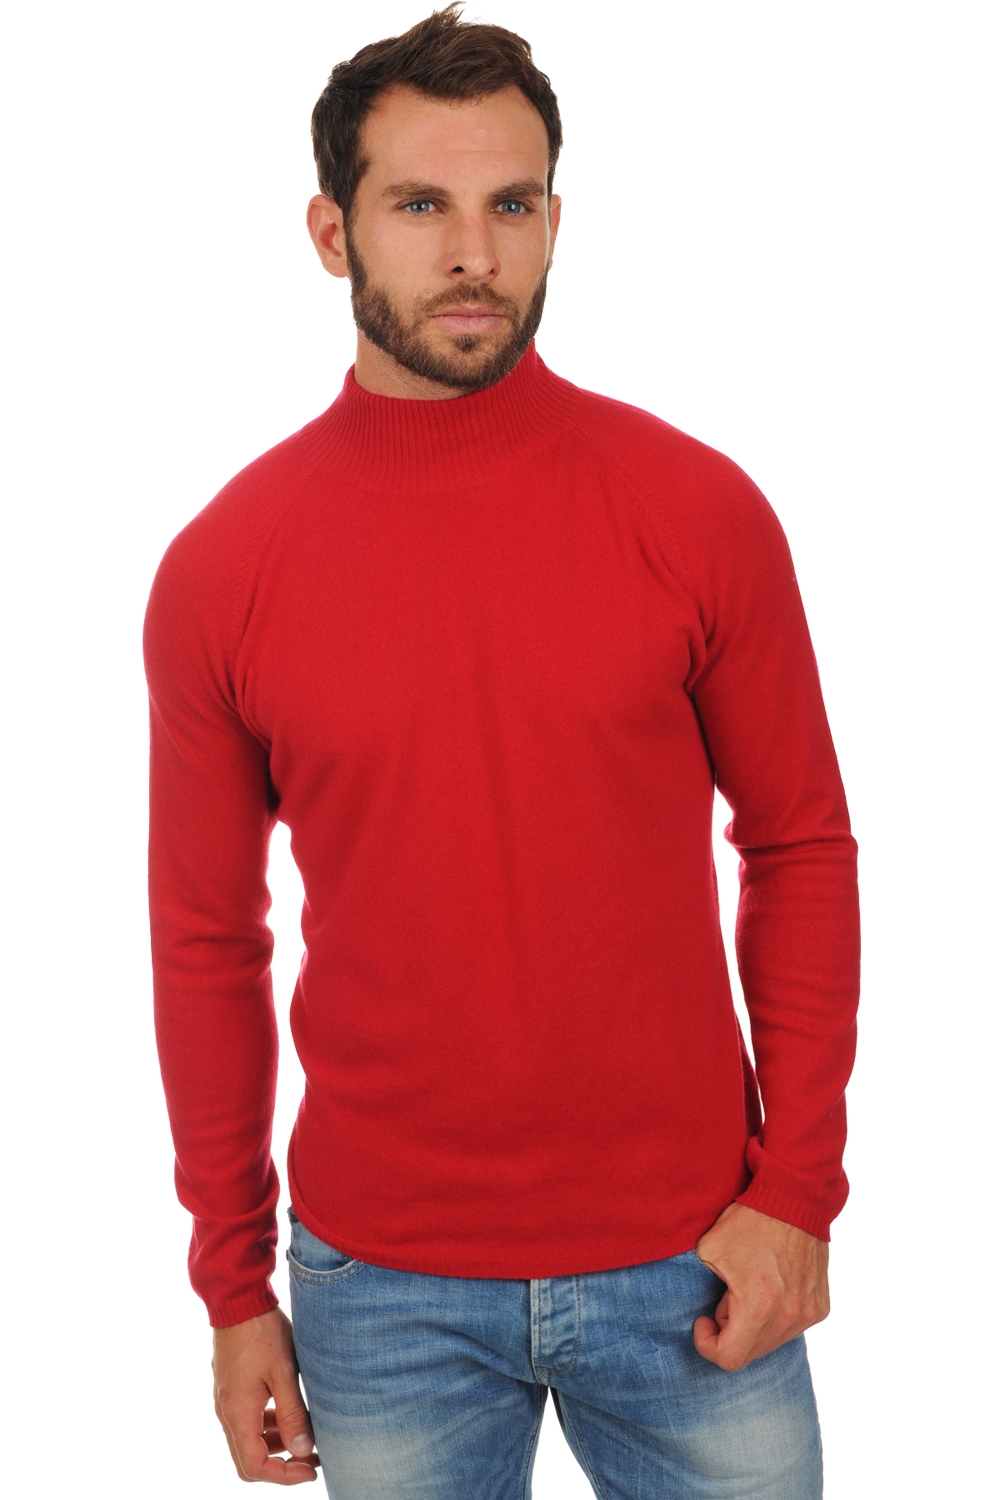 Cashmere men timeless classics frederic blood red 3xl